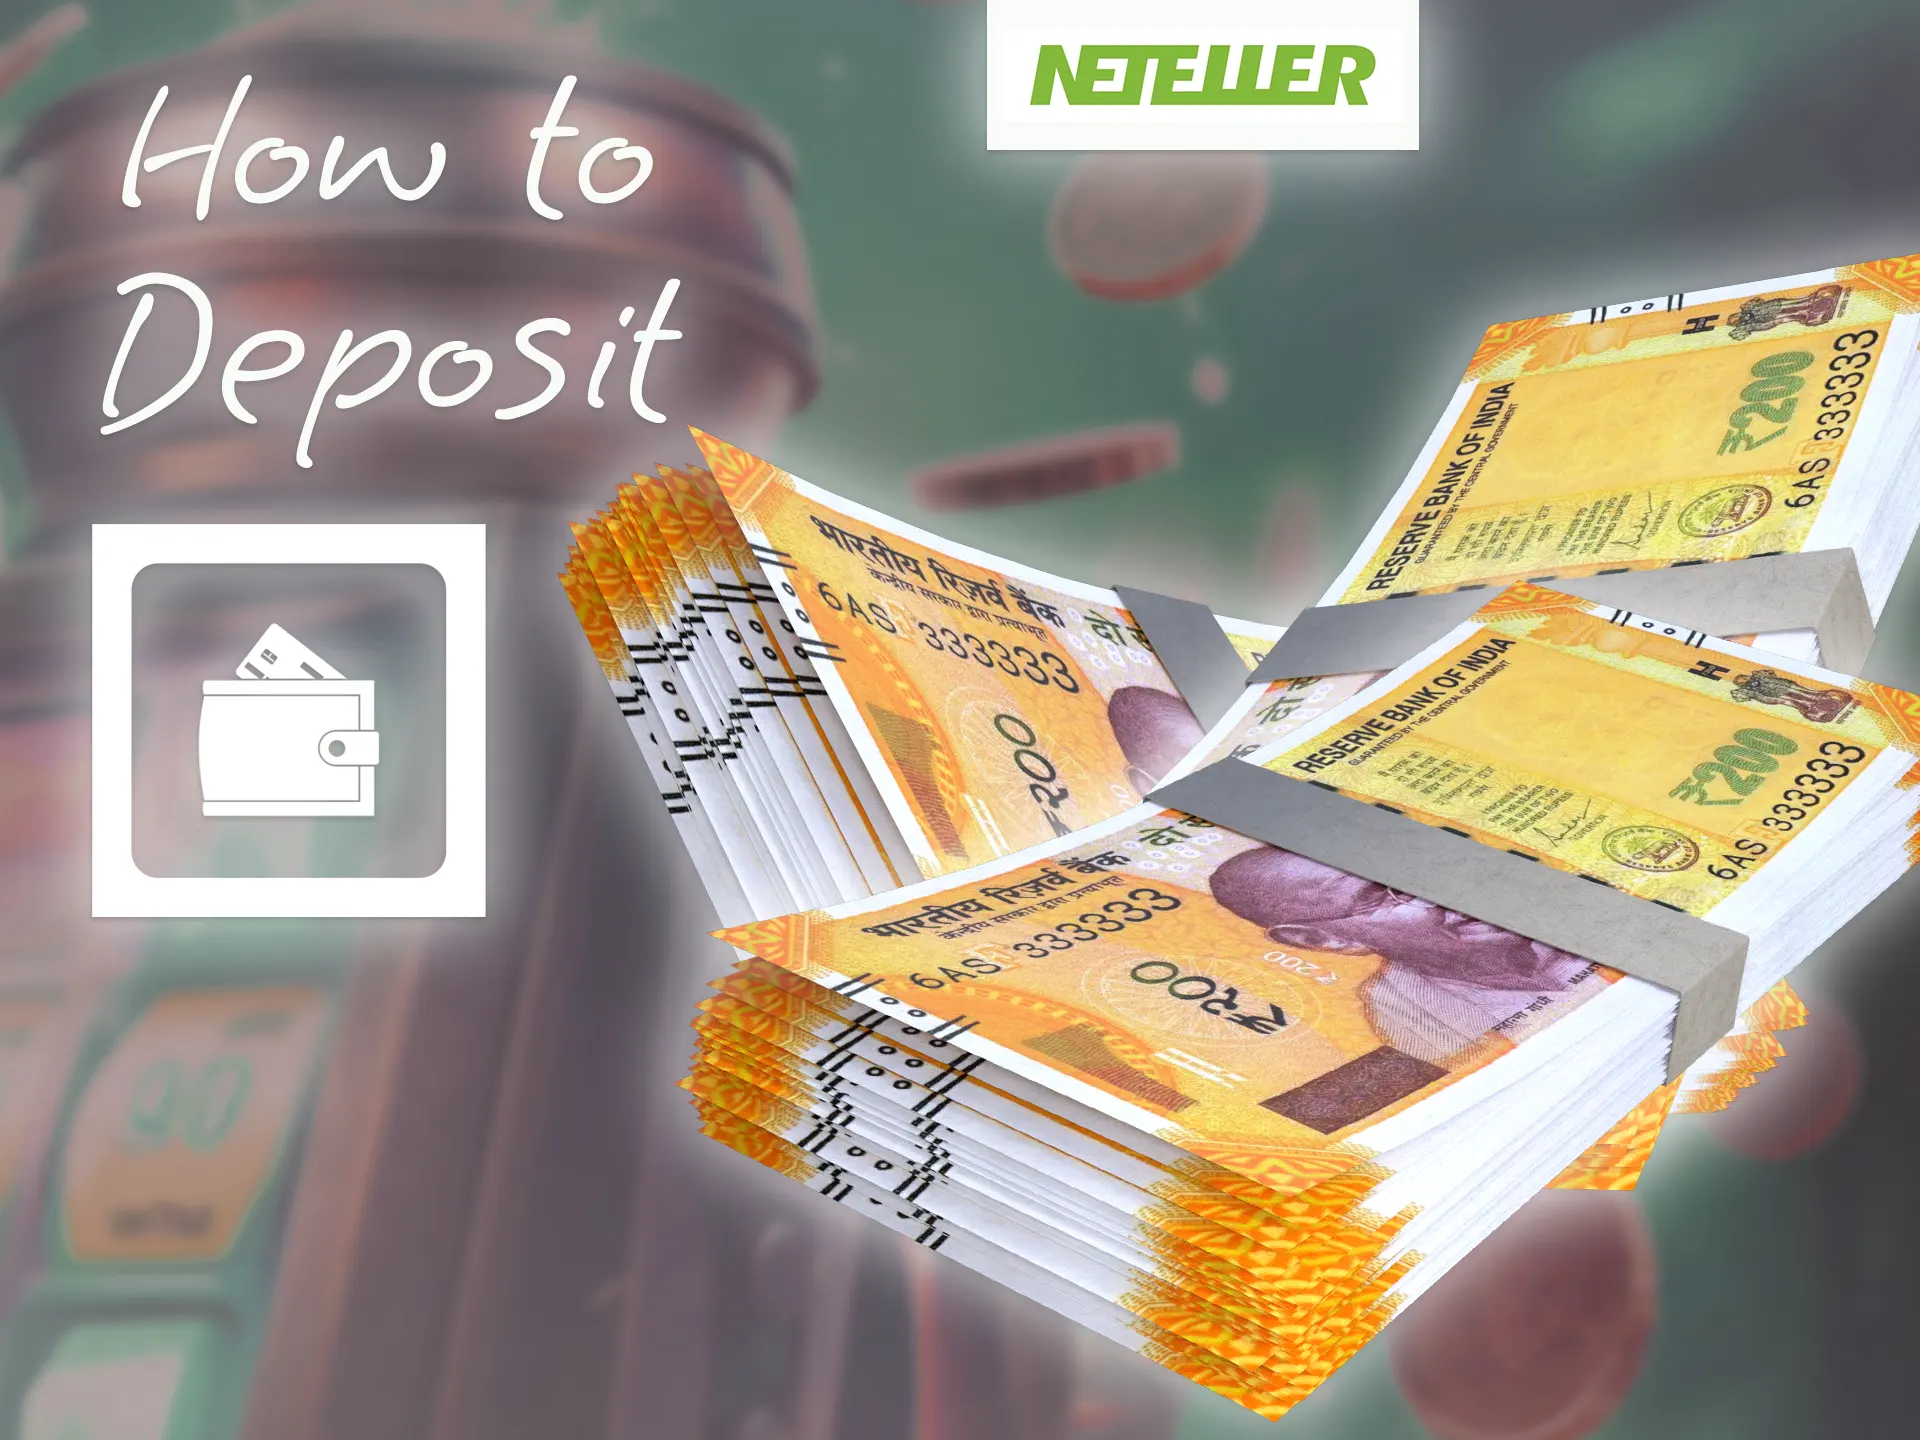 Fund your account using Neteller.